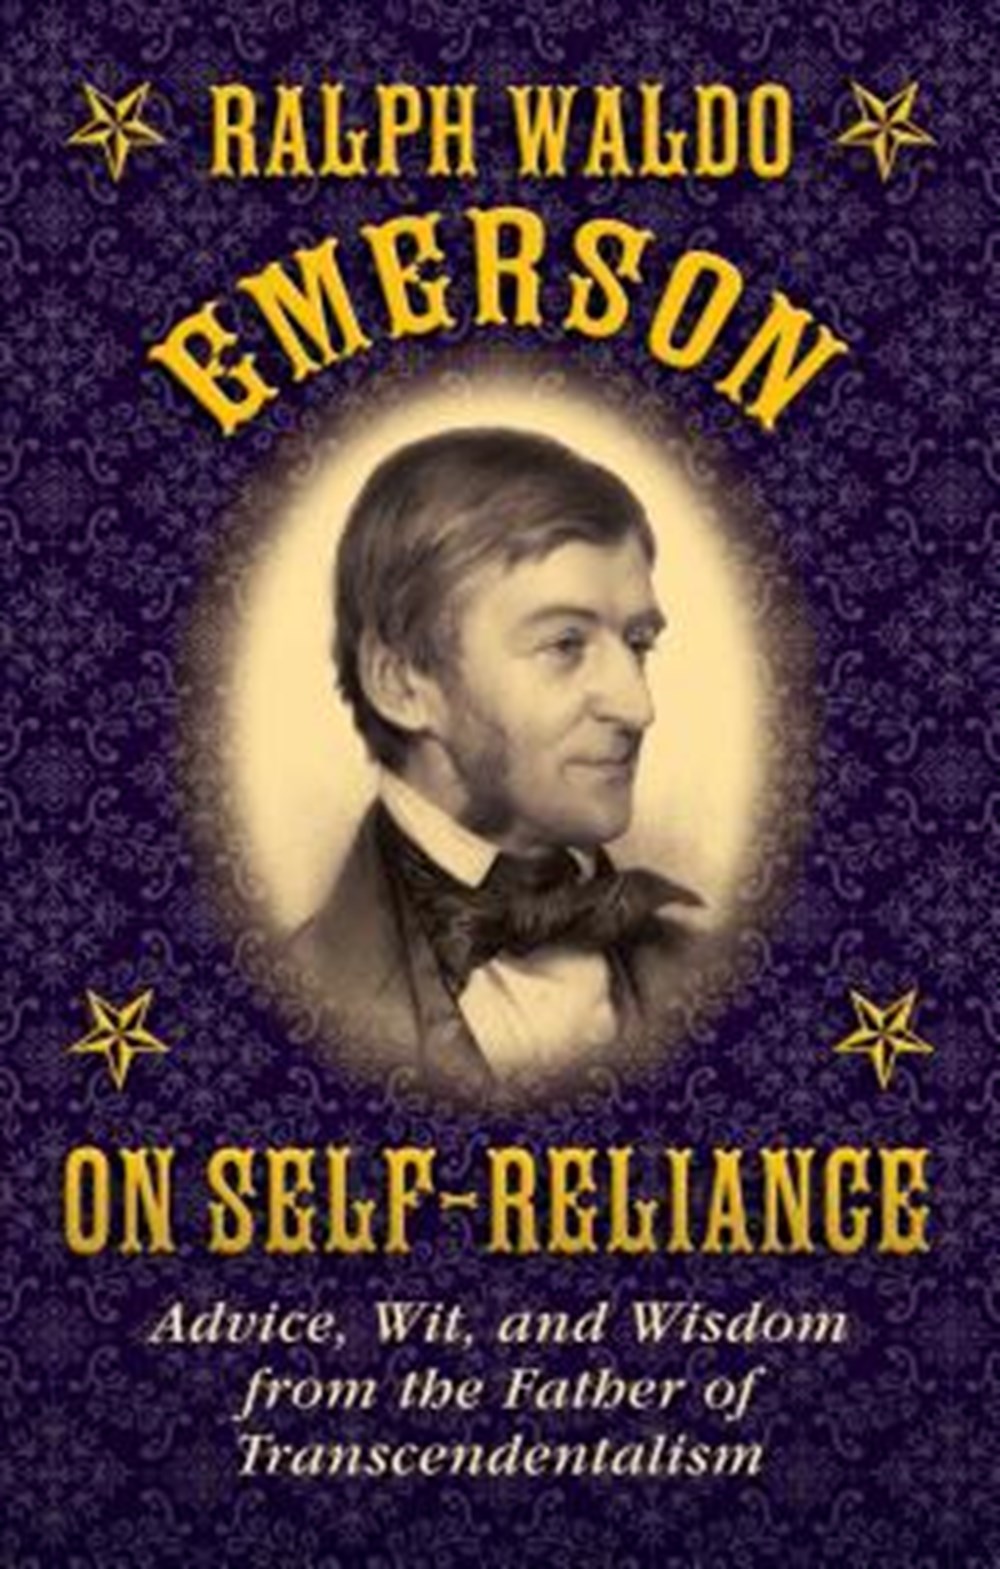 Ralph Waldo Emerson on Self-Reliance Advice, Wit, and Wisdom from the Father of Transcendentalism